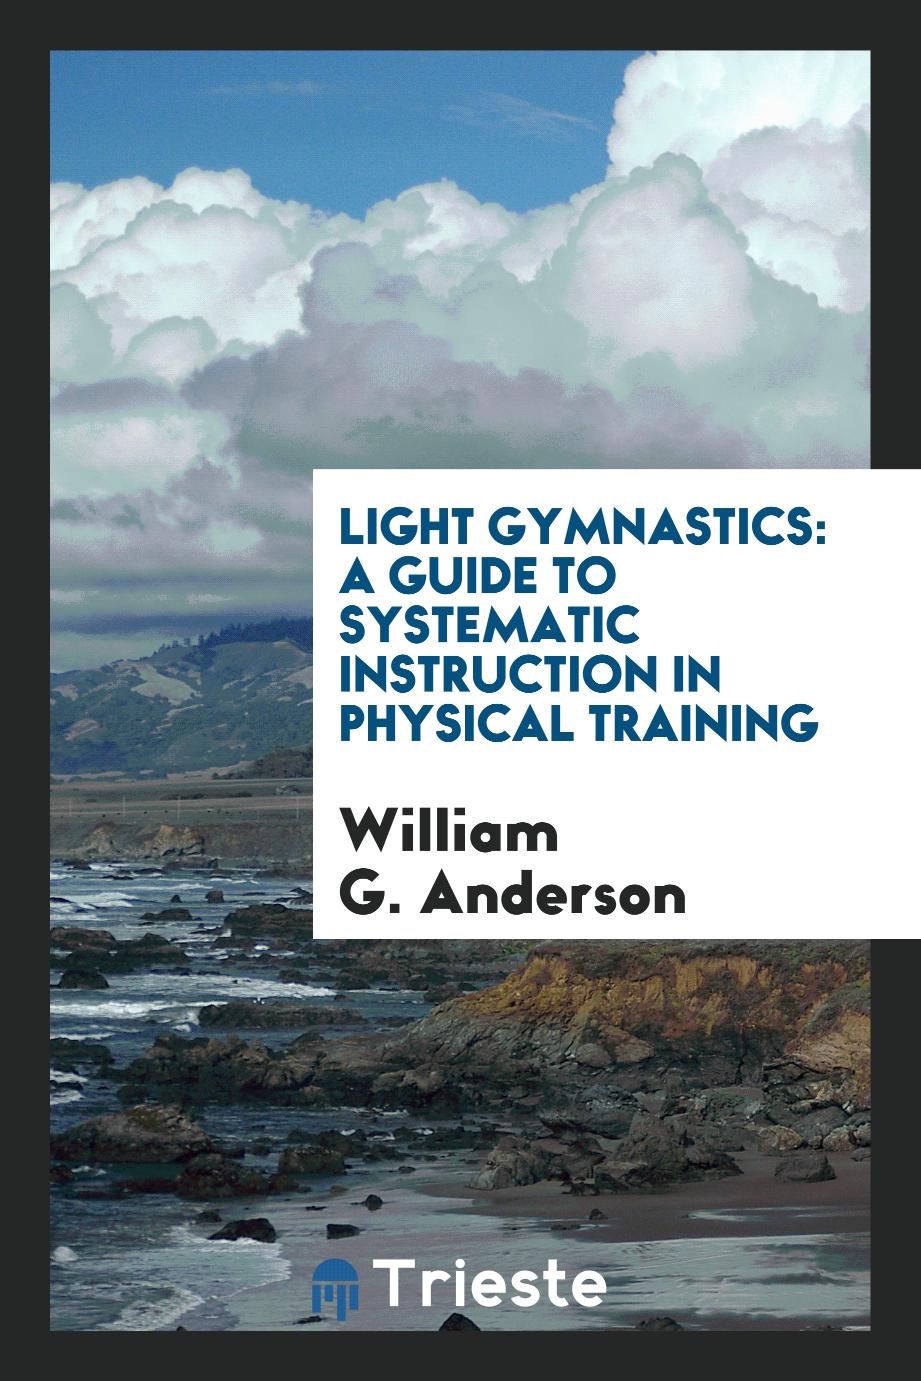 Light gymnastics: a guide to systematic instruction in physical training